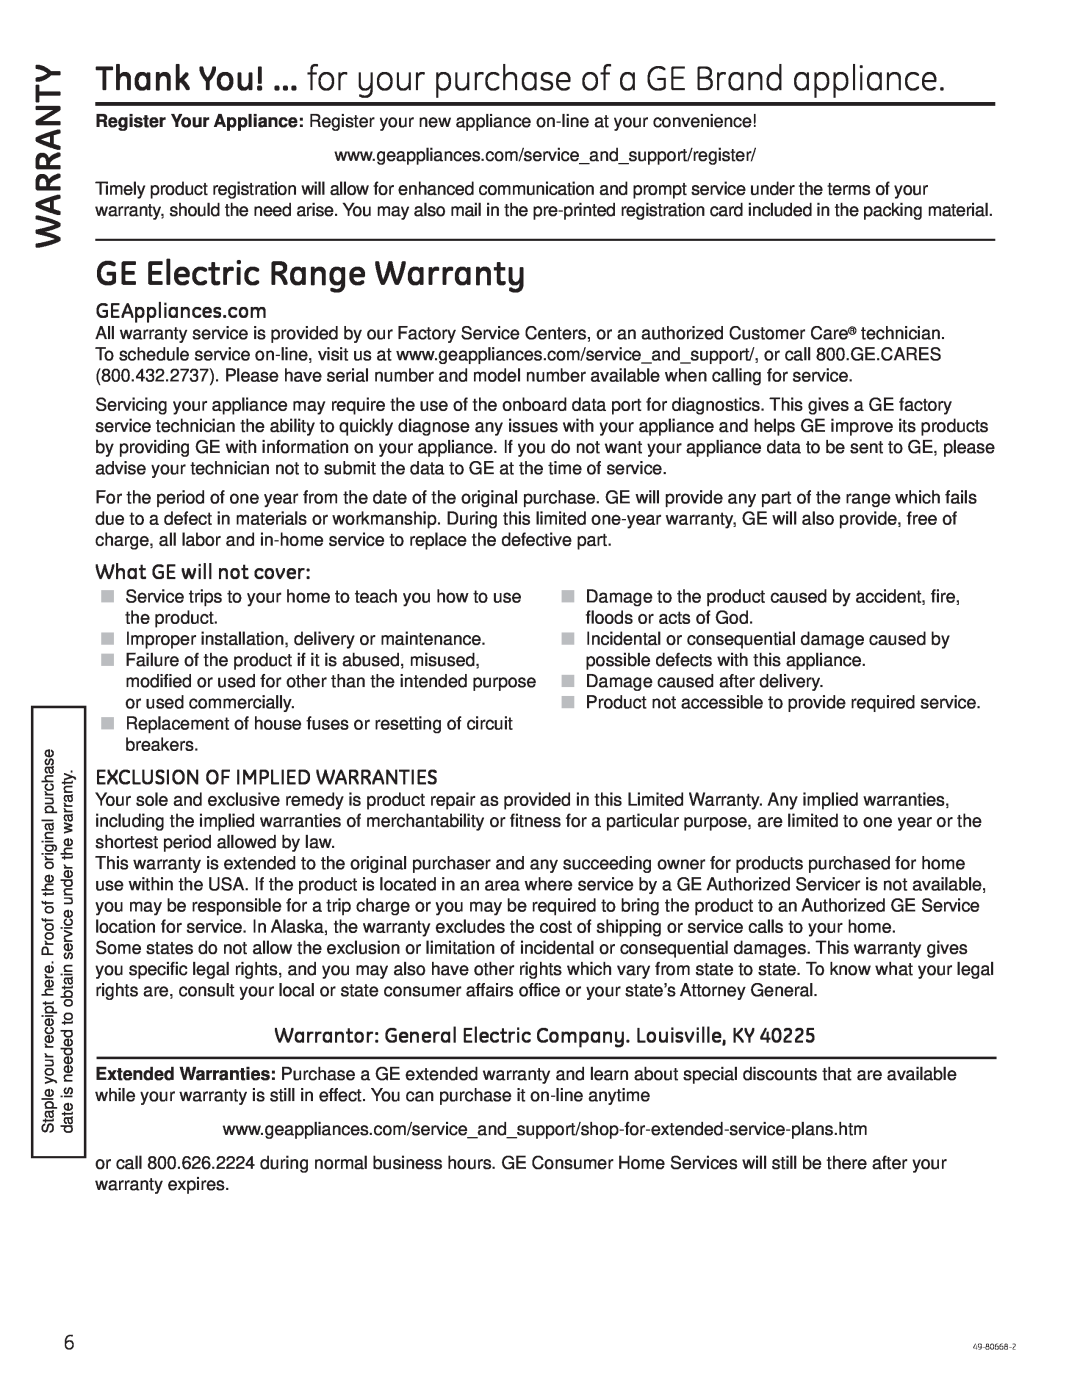 GE PT7050 GE Electric Range Warranty, GEAppliances.com, What GE will not cover, Exclusion Of Implied Warranties 